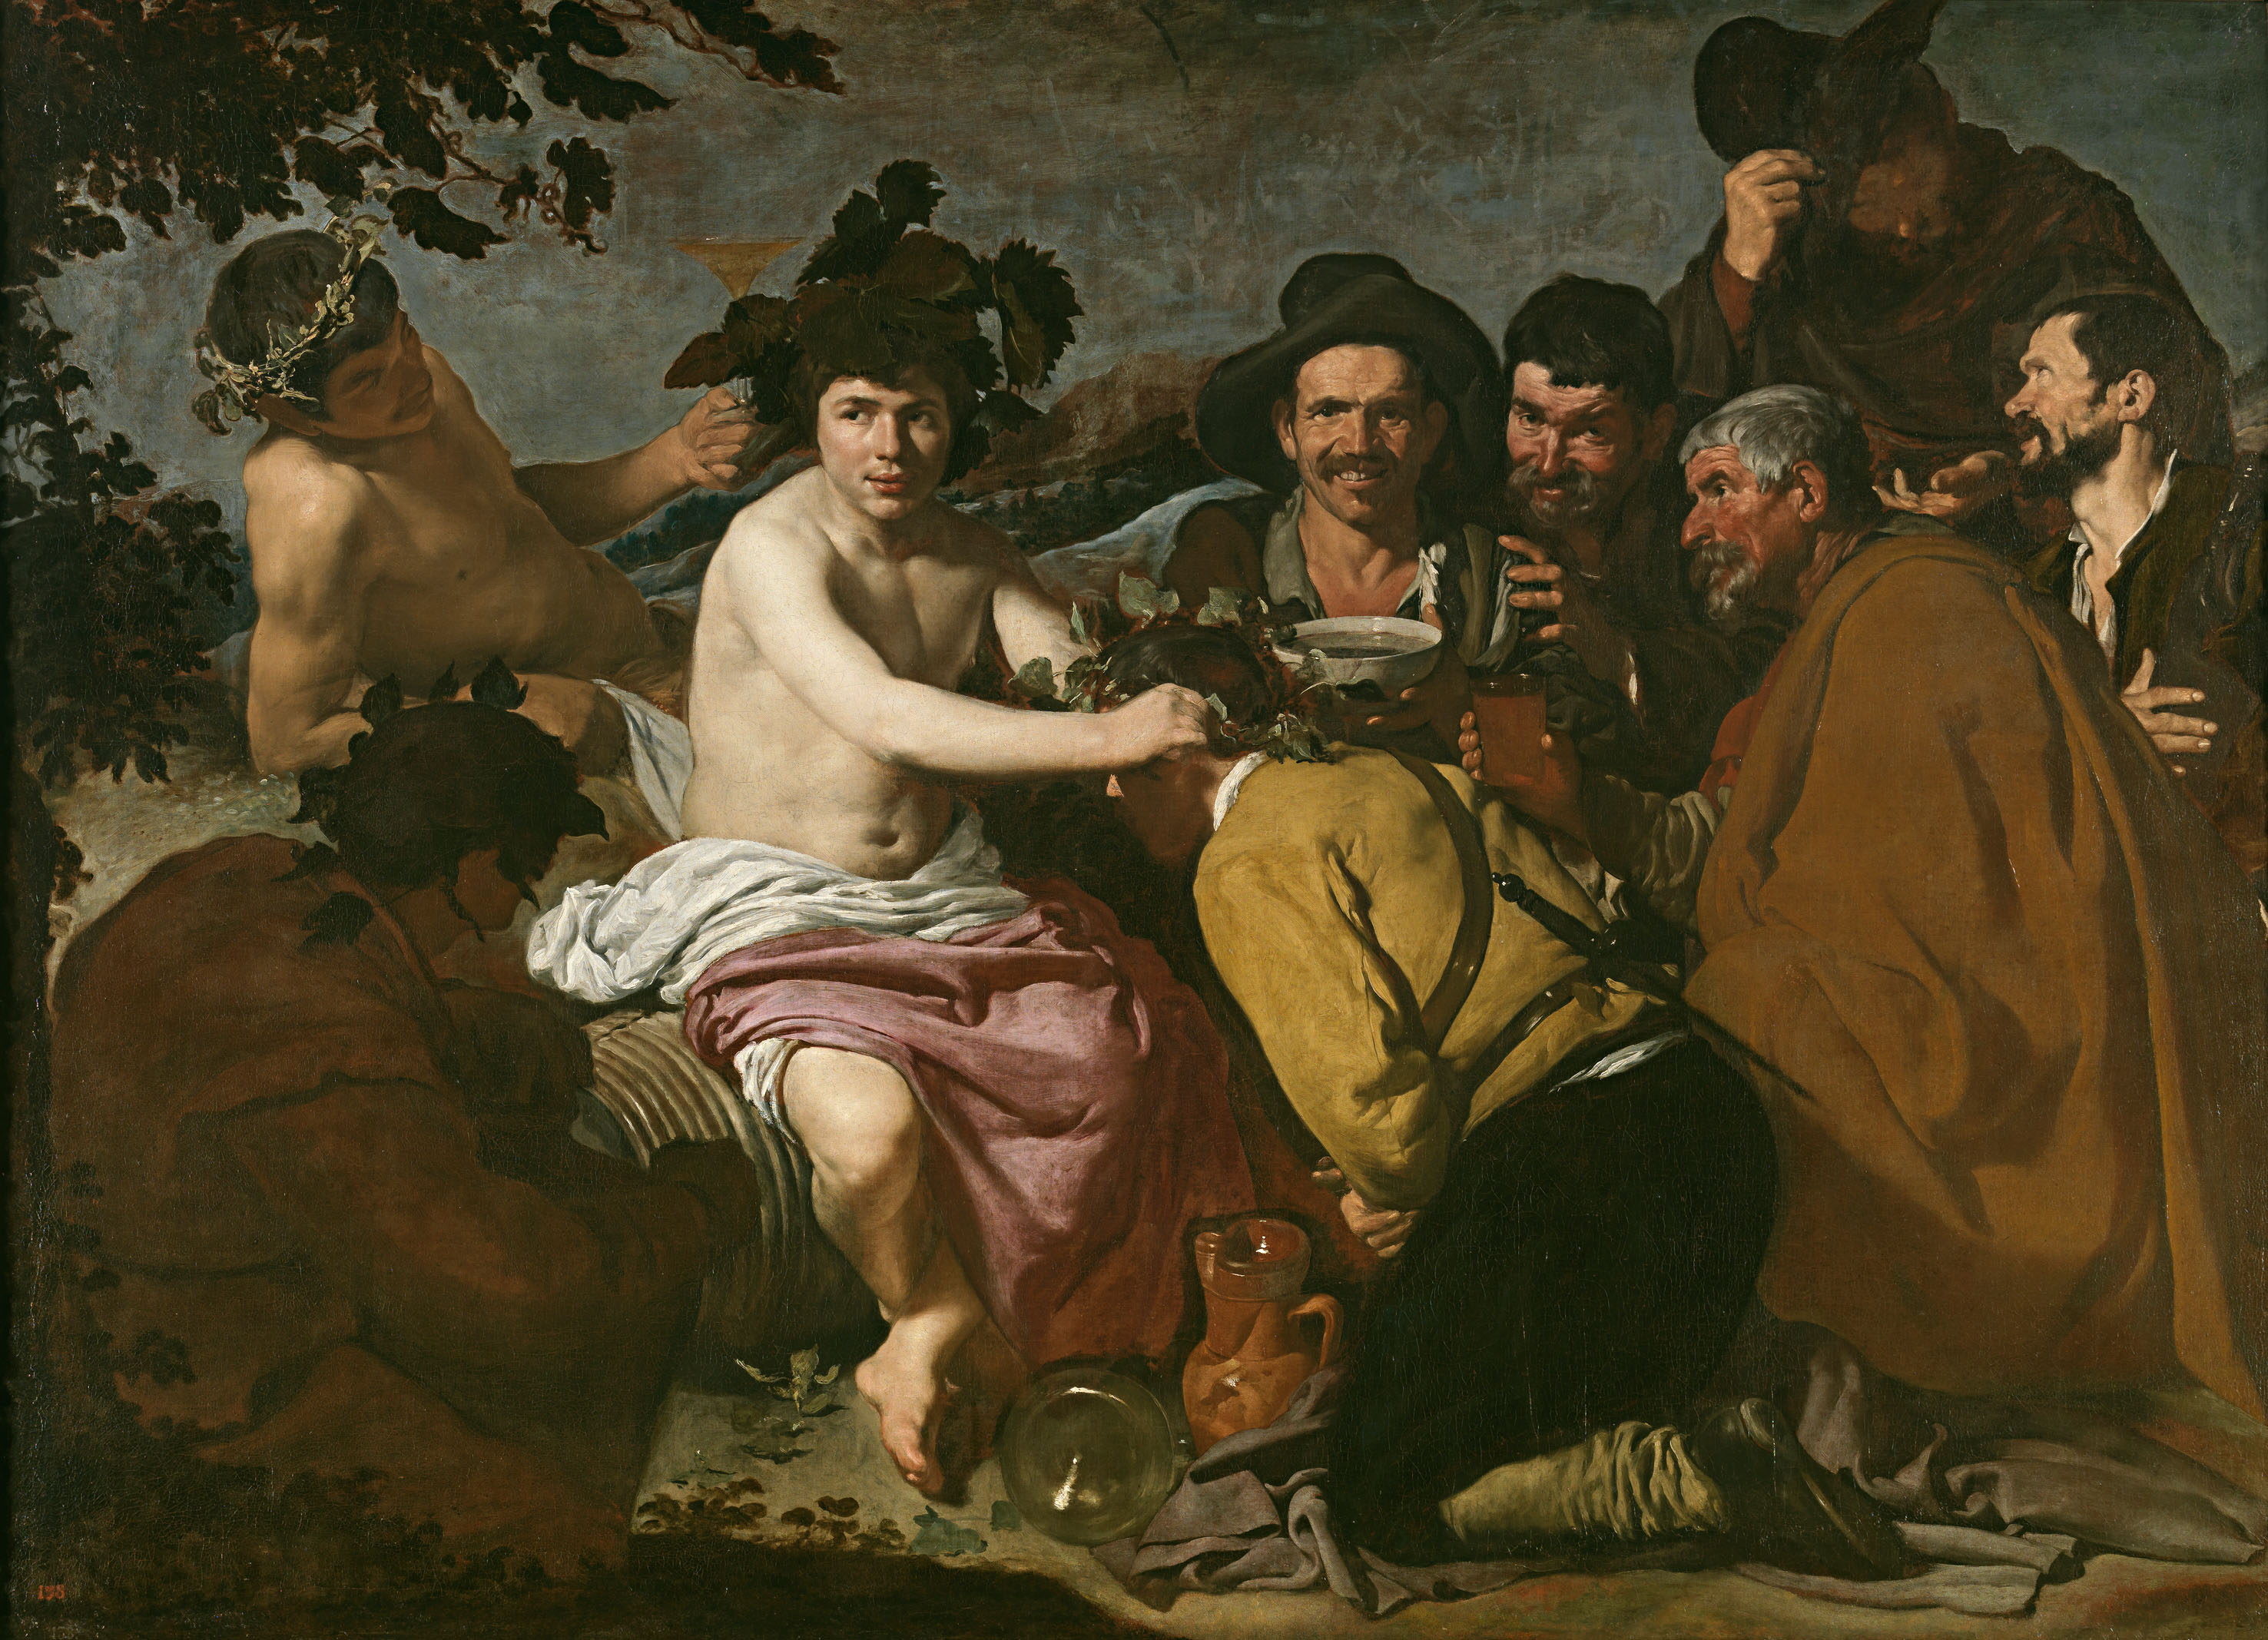 The Drinkers, or The Triumph of Bacchus, Velázquez